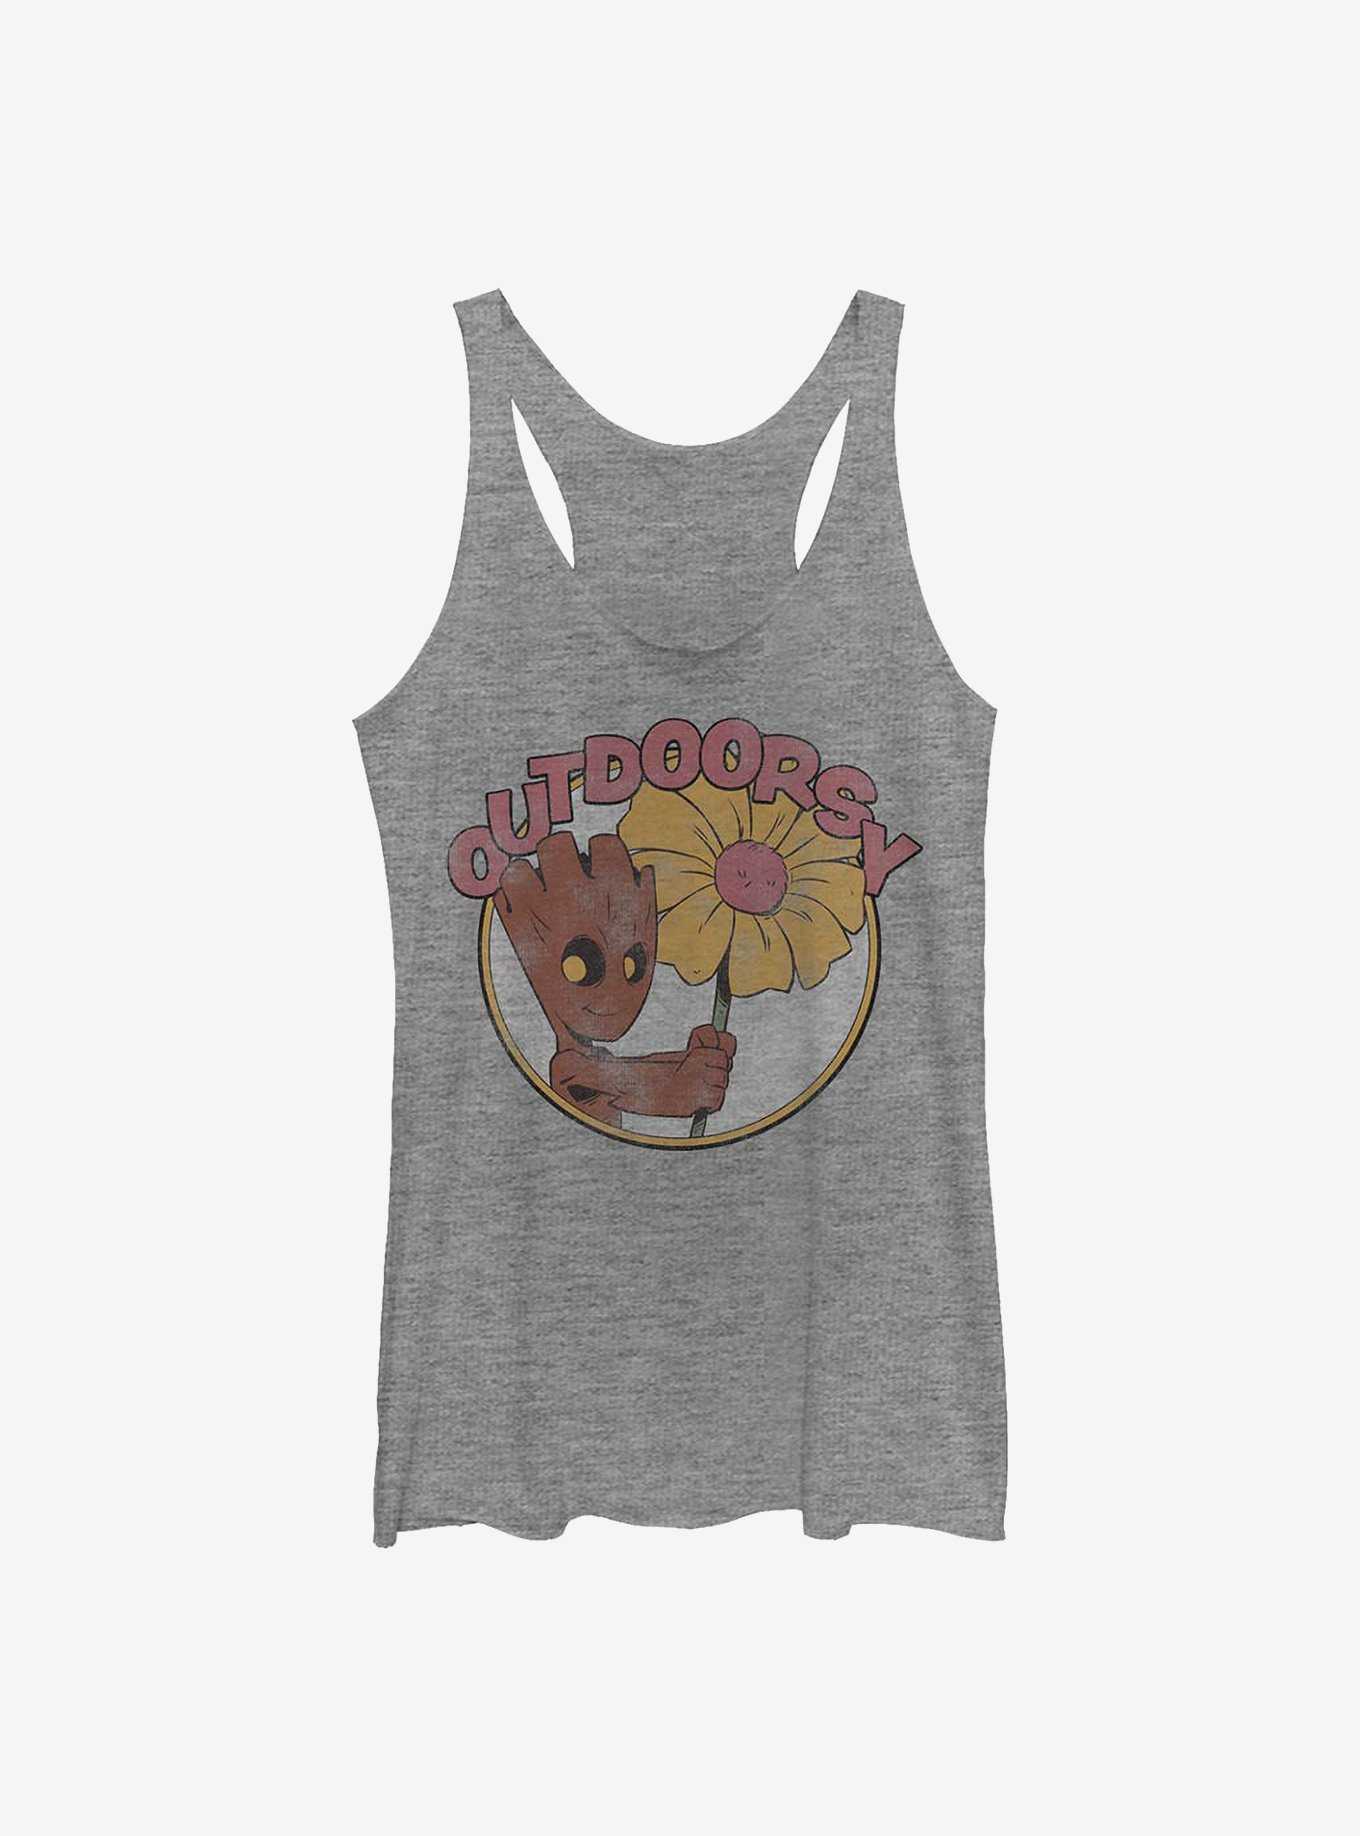 Marvel Guardians Of The Galaxy Outdoorsy Groot Girls Tank, , hi-res